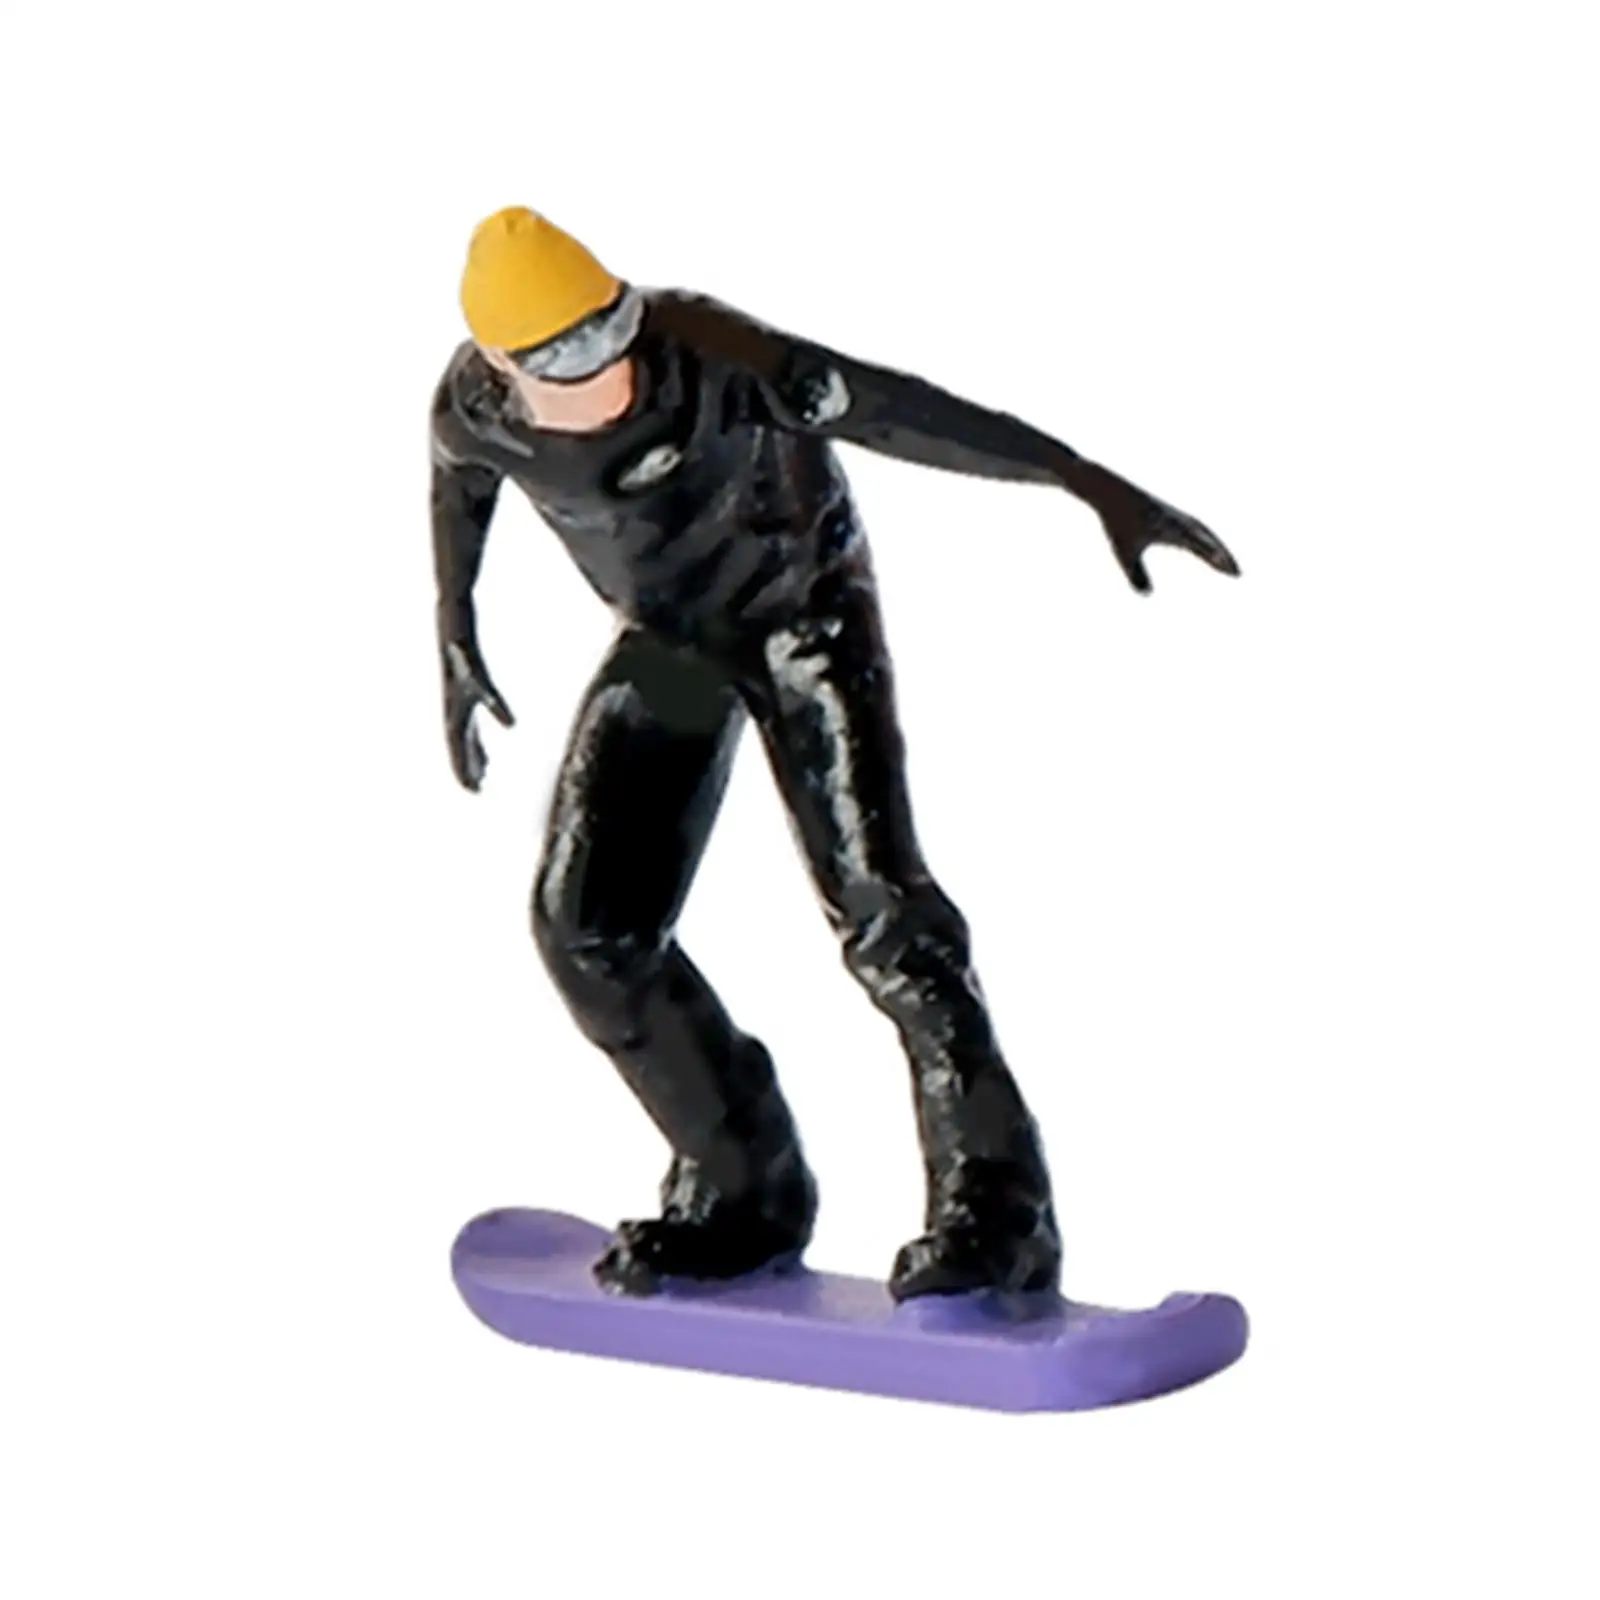 1/64 Scale Miniature Model Skiing Figures Ornament for DIY Projects Layout